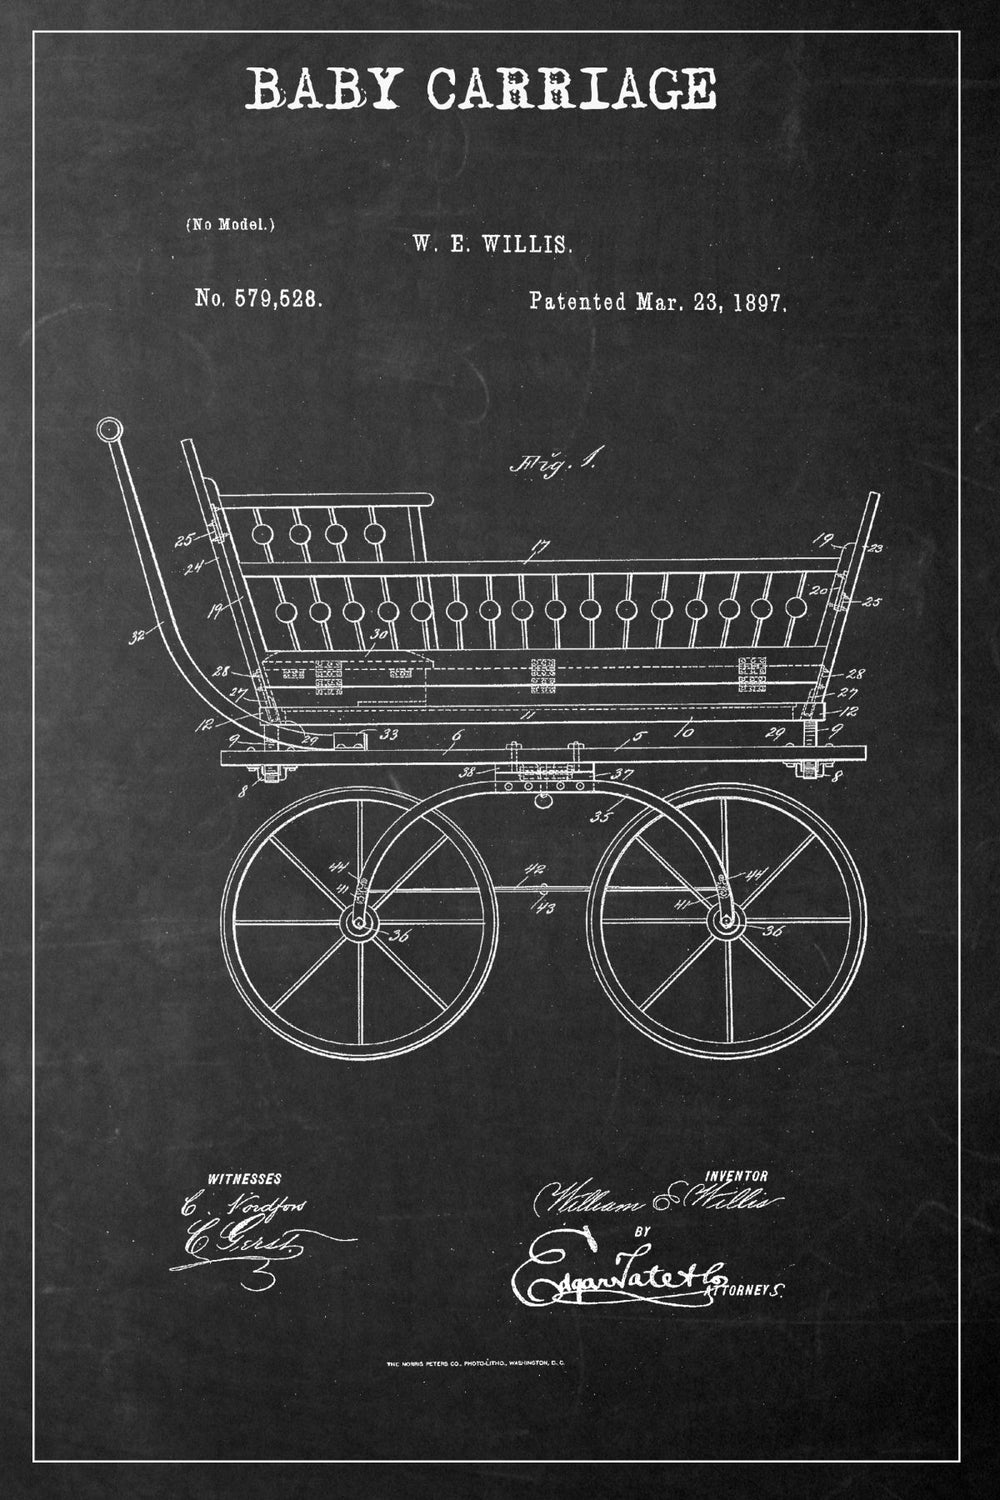 Baby Carriage Patent BW